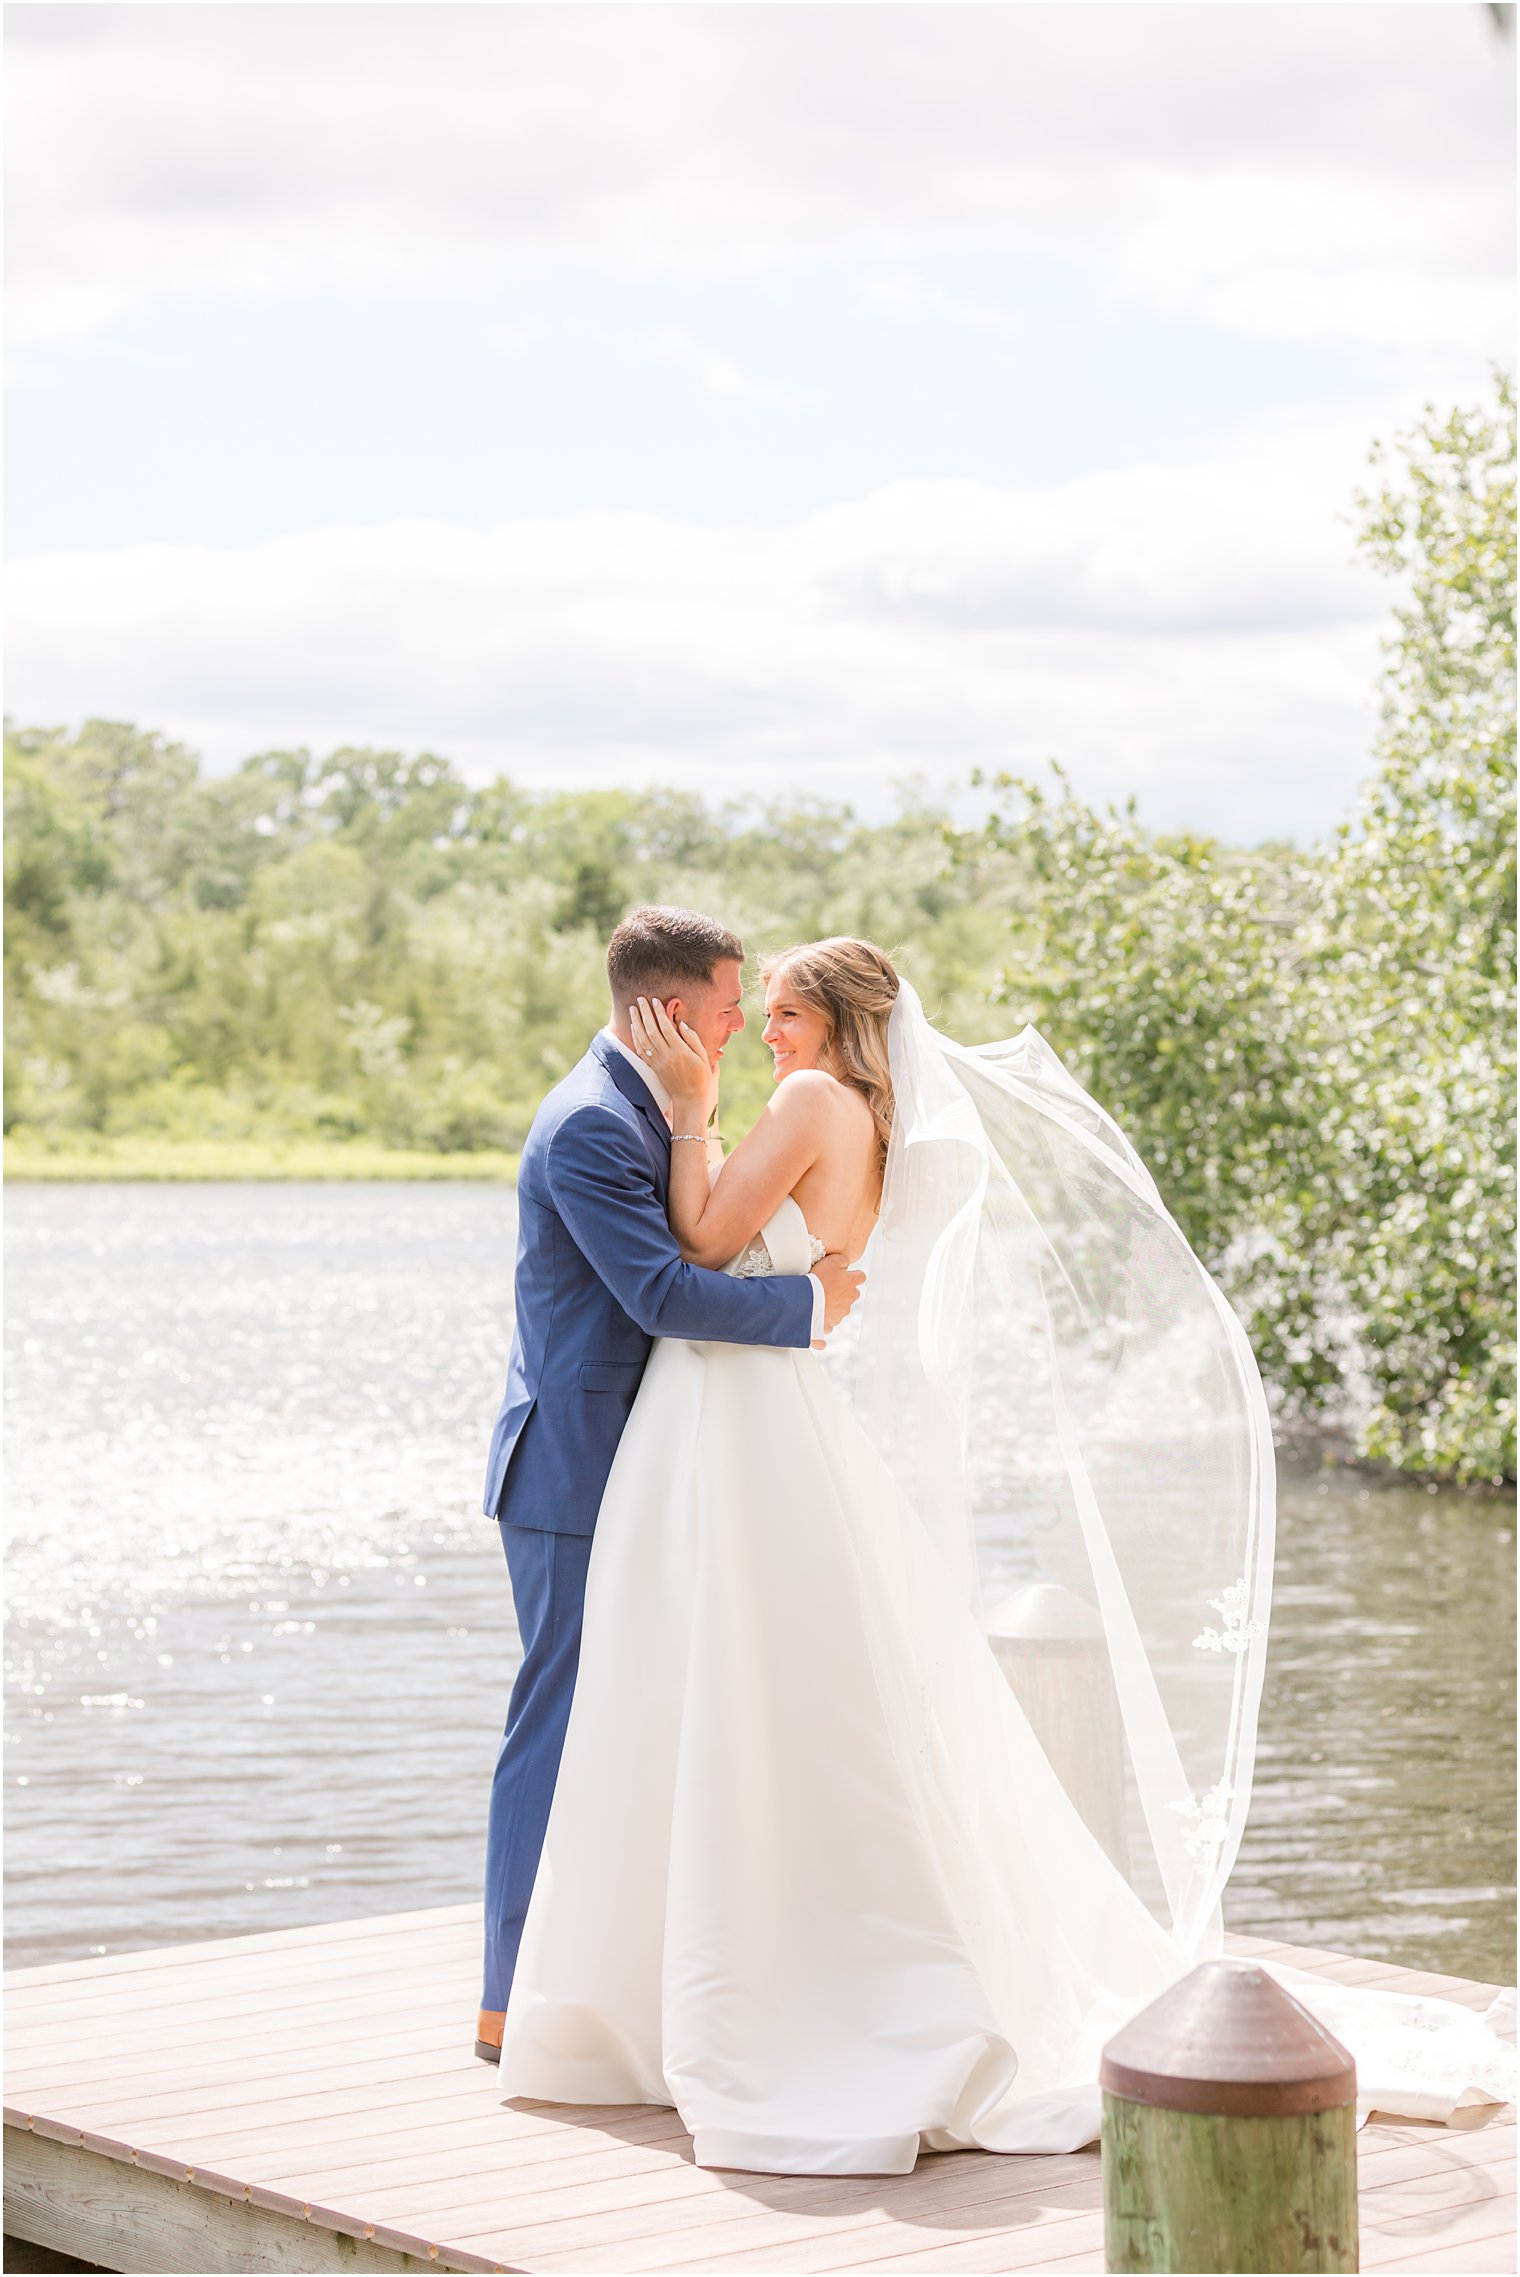 couple laughs while bride's veil moves in wind on dock 